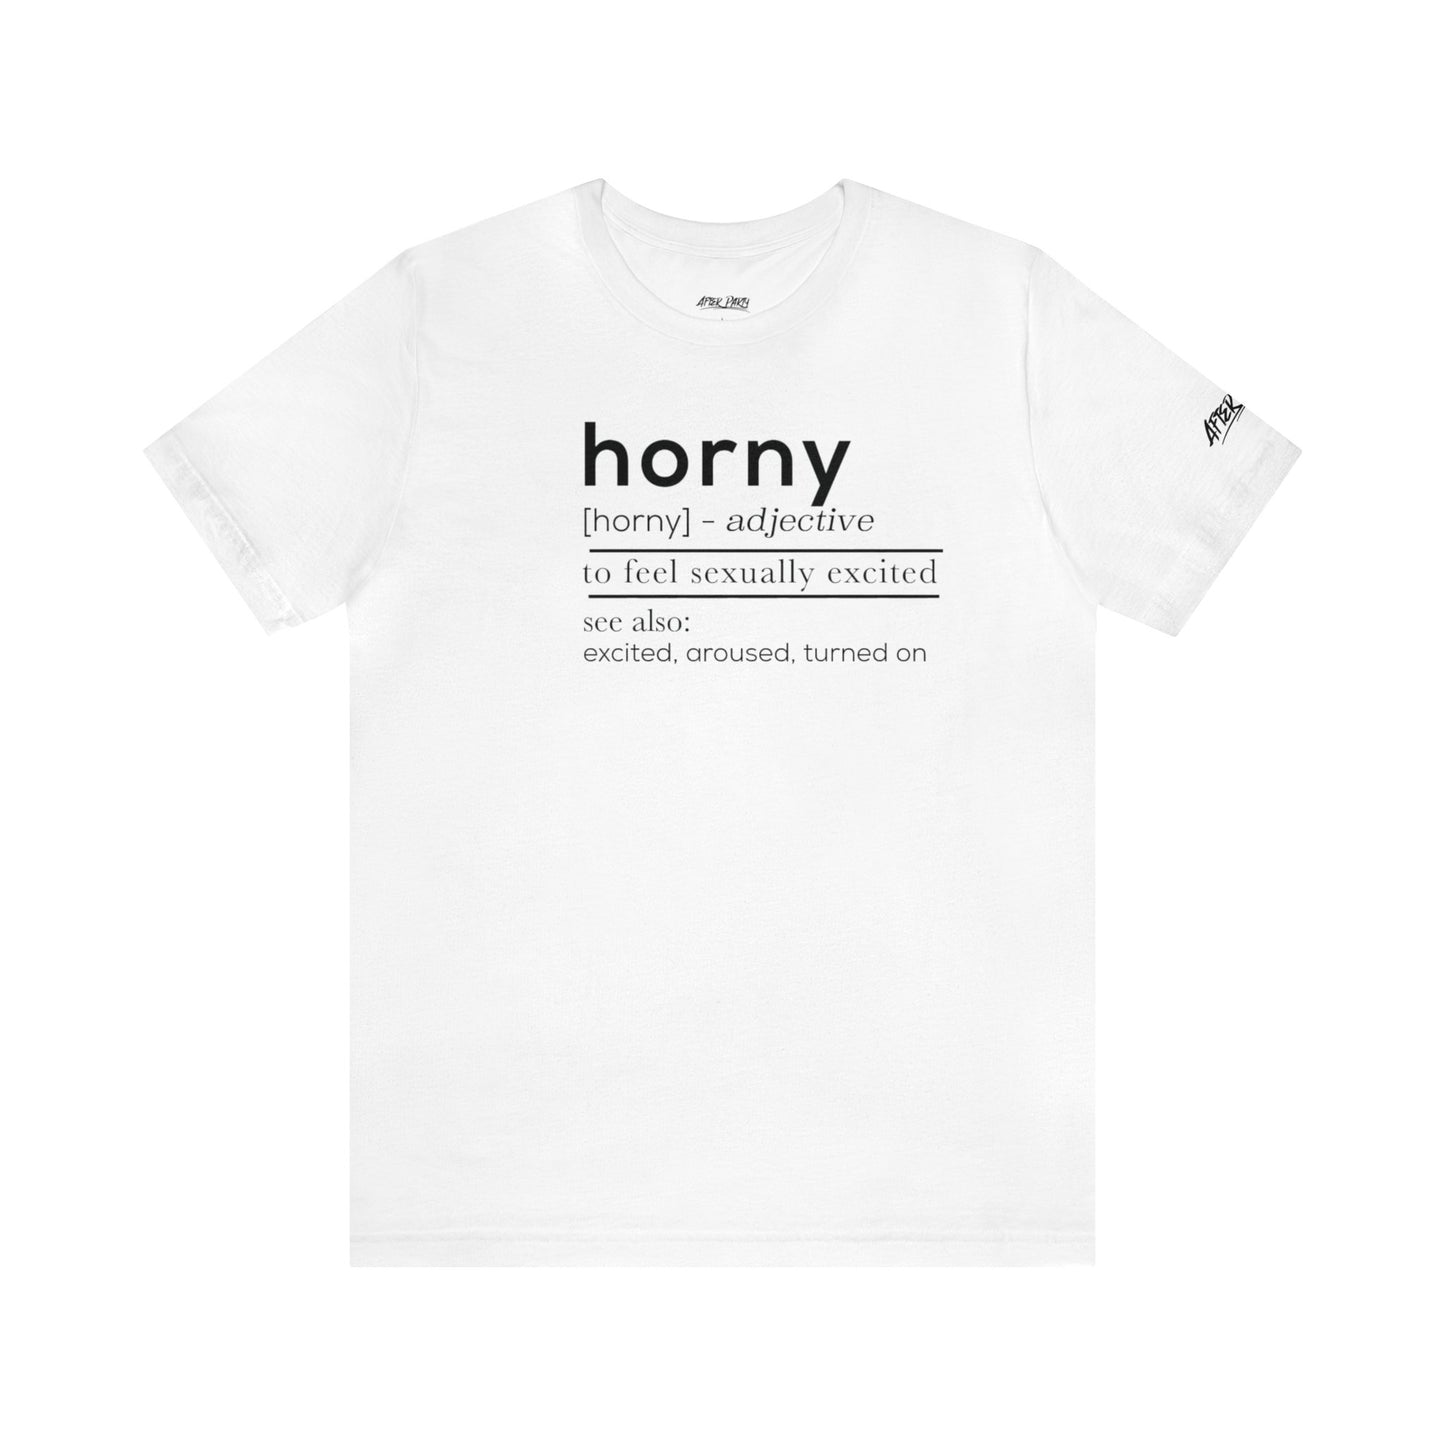 Horny Definition